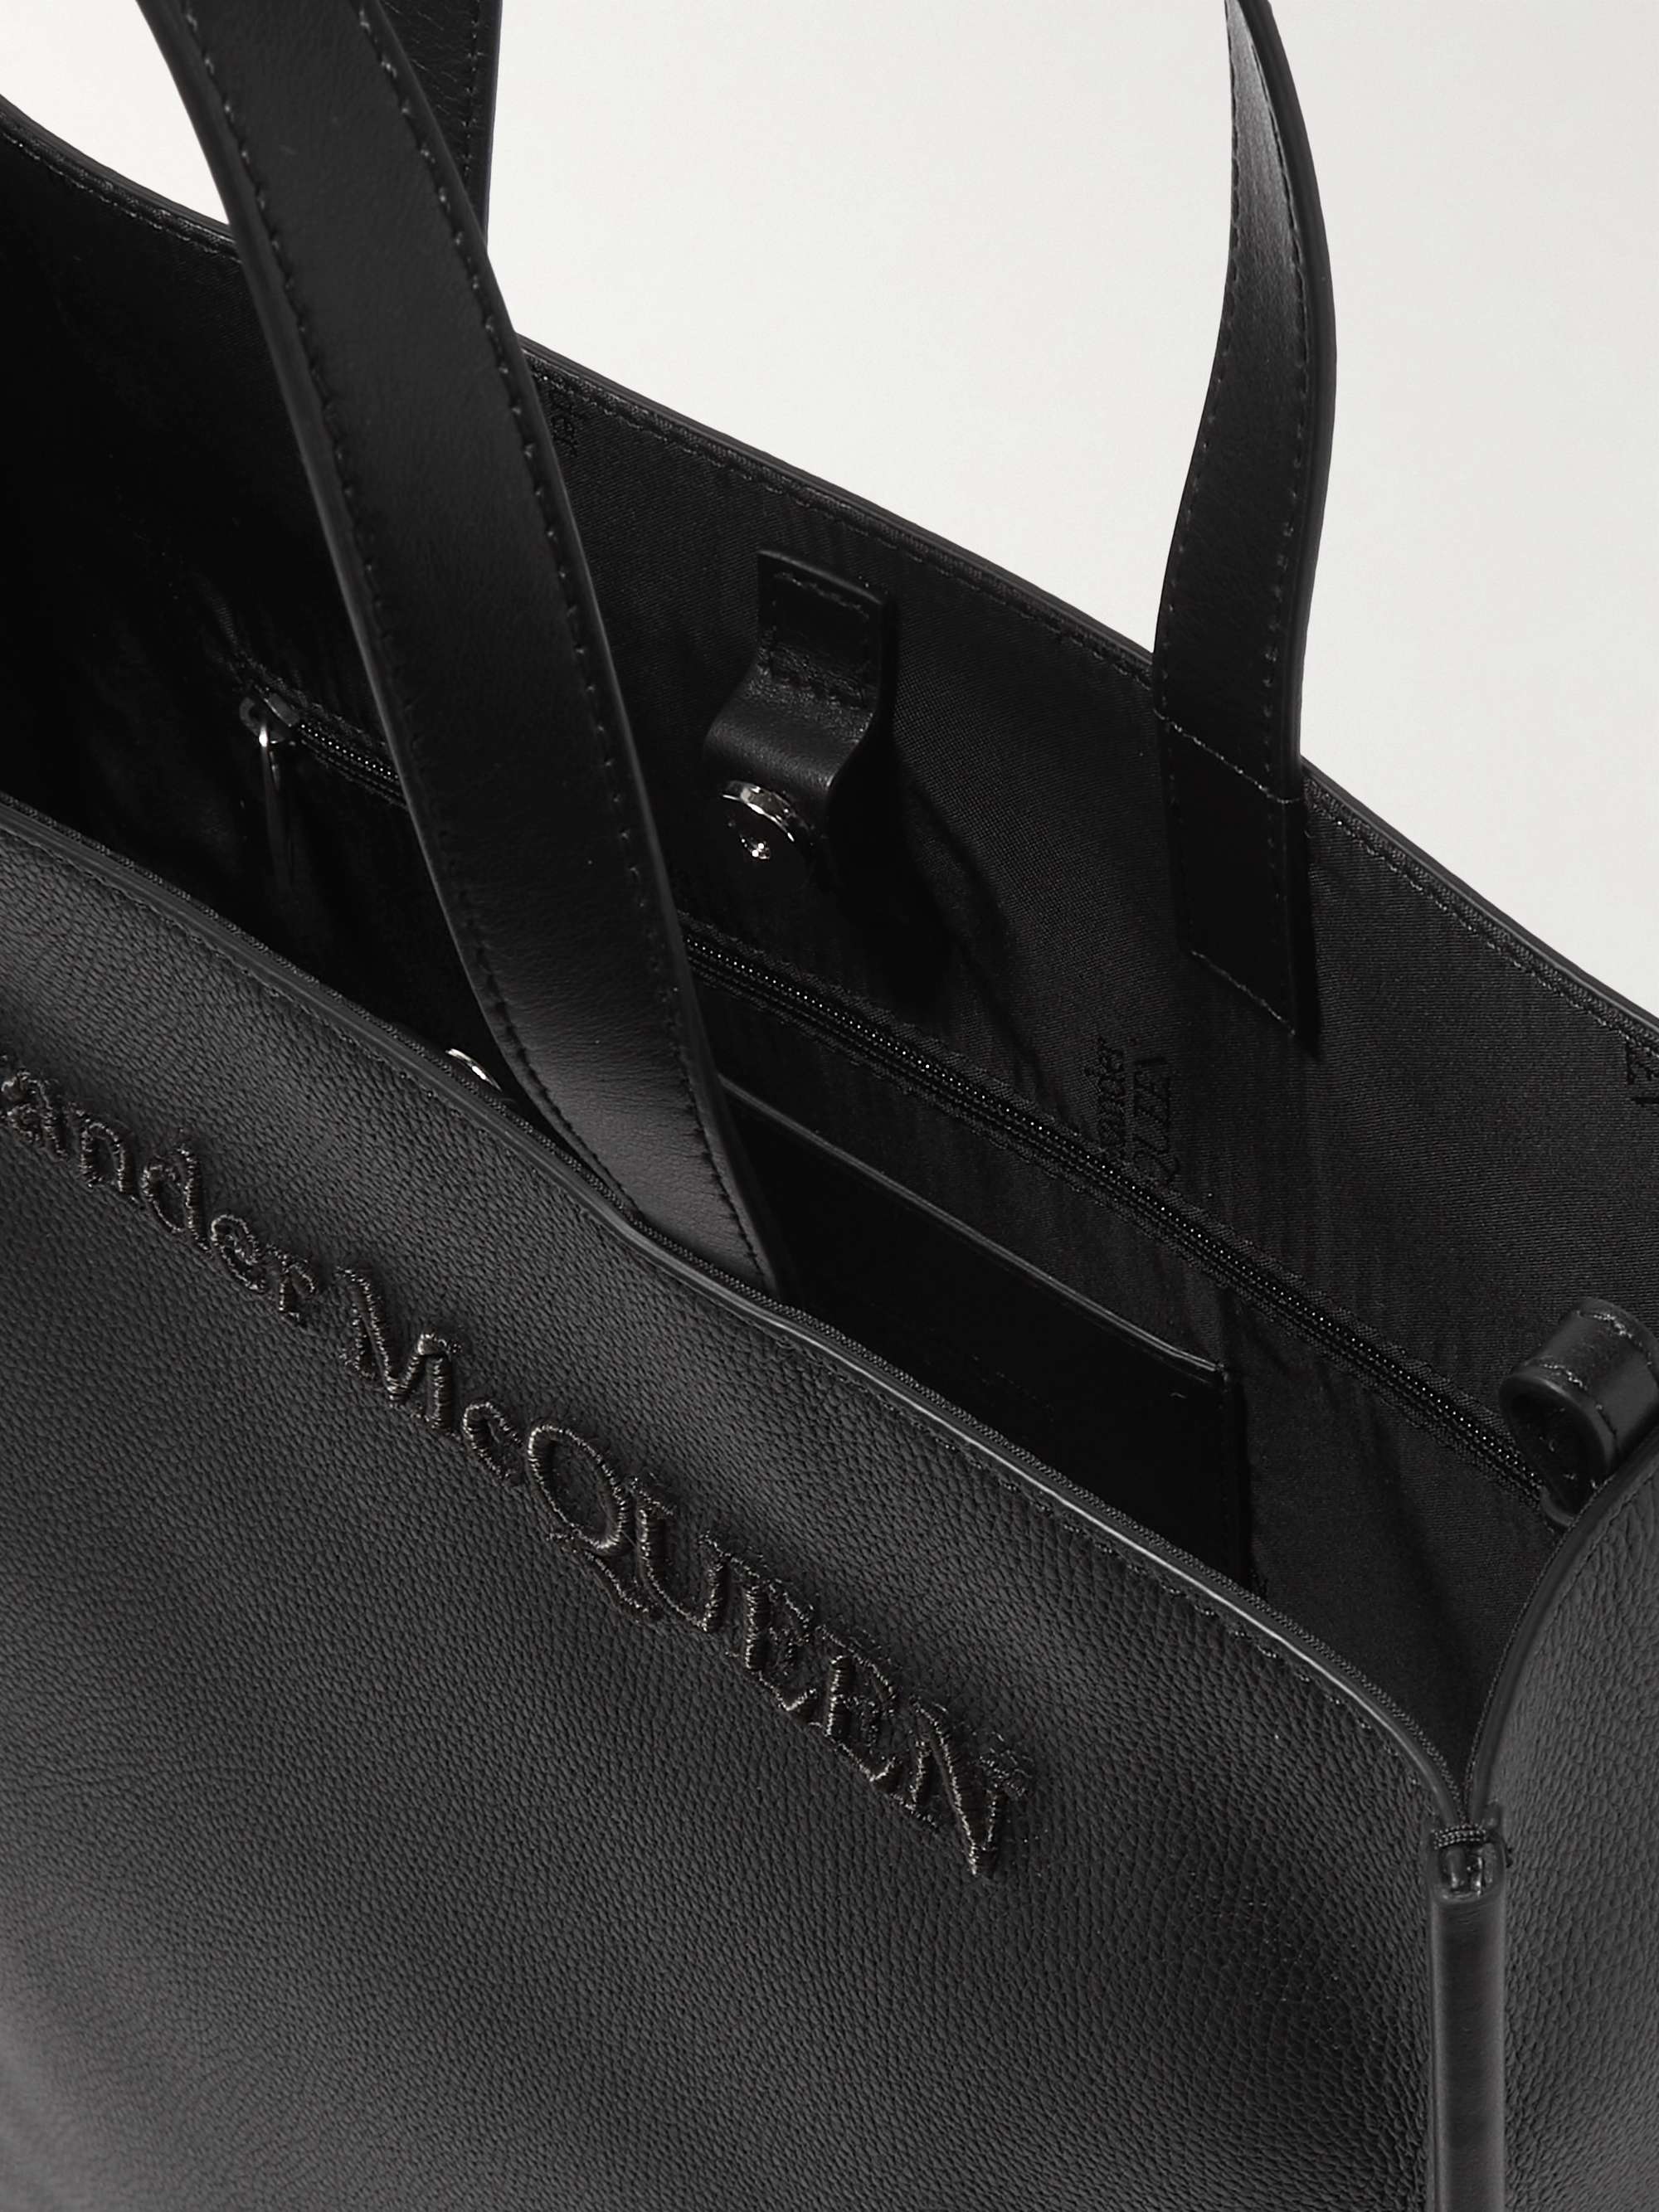 ALEXANDER MCQUEEN North South Logo-Embossed Full-Grain Leather Tote Bag